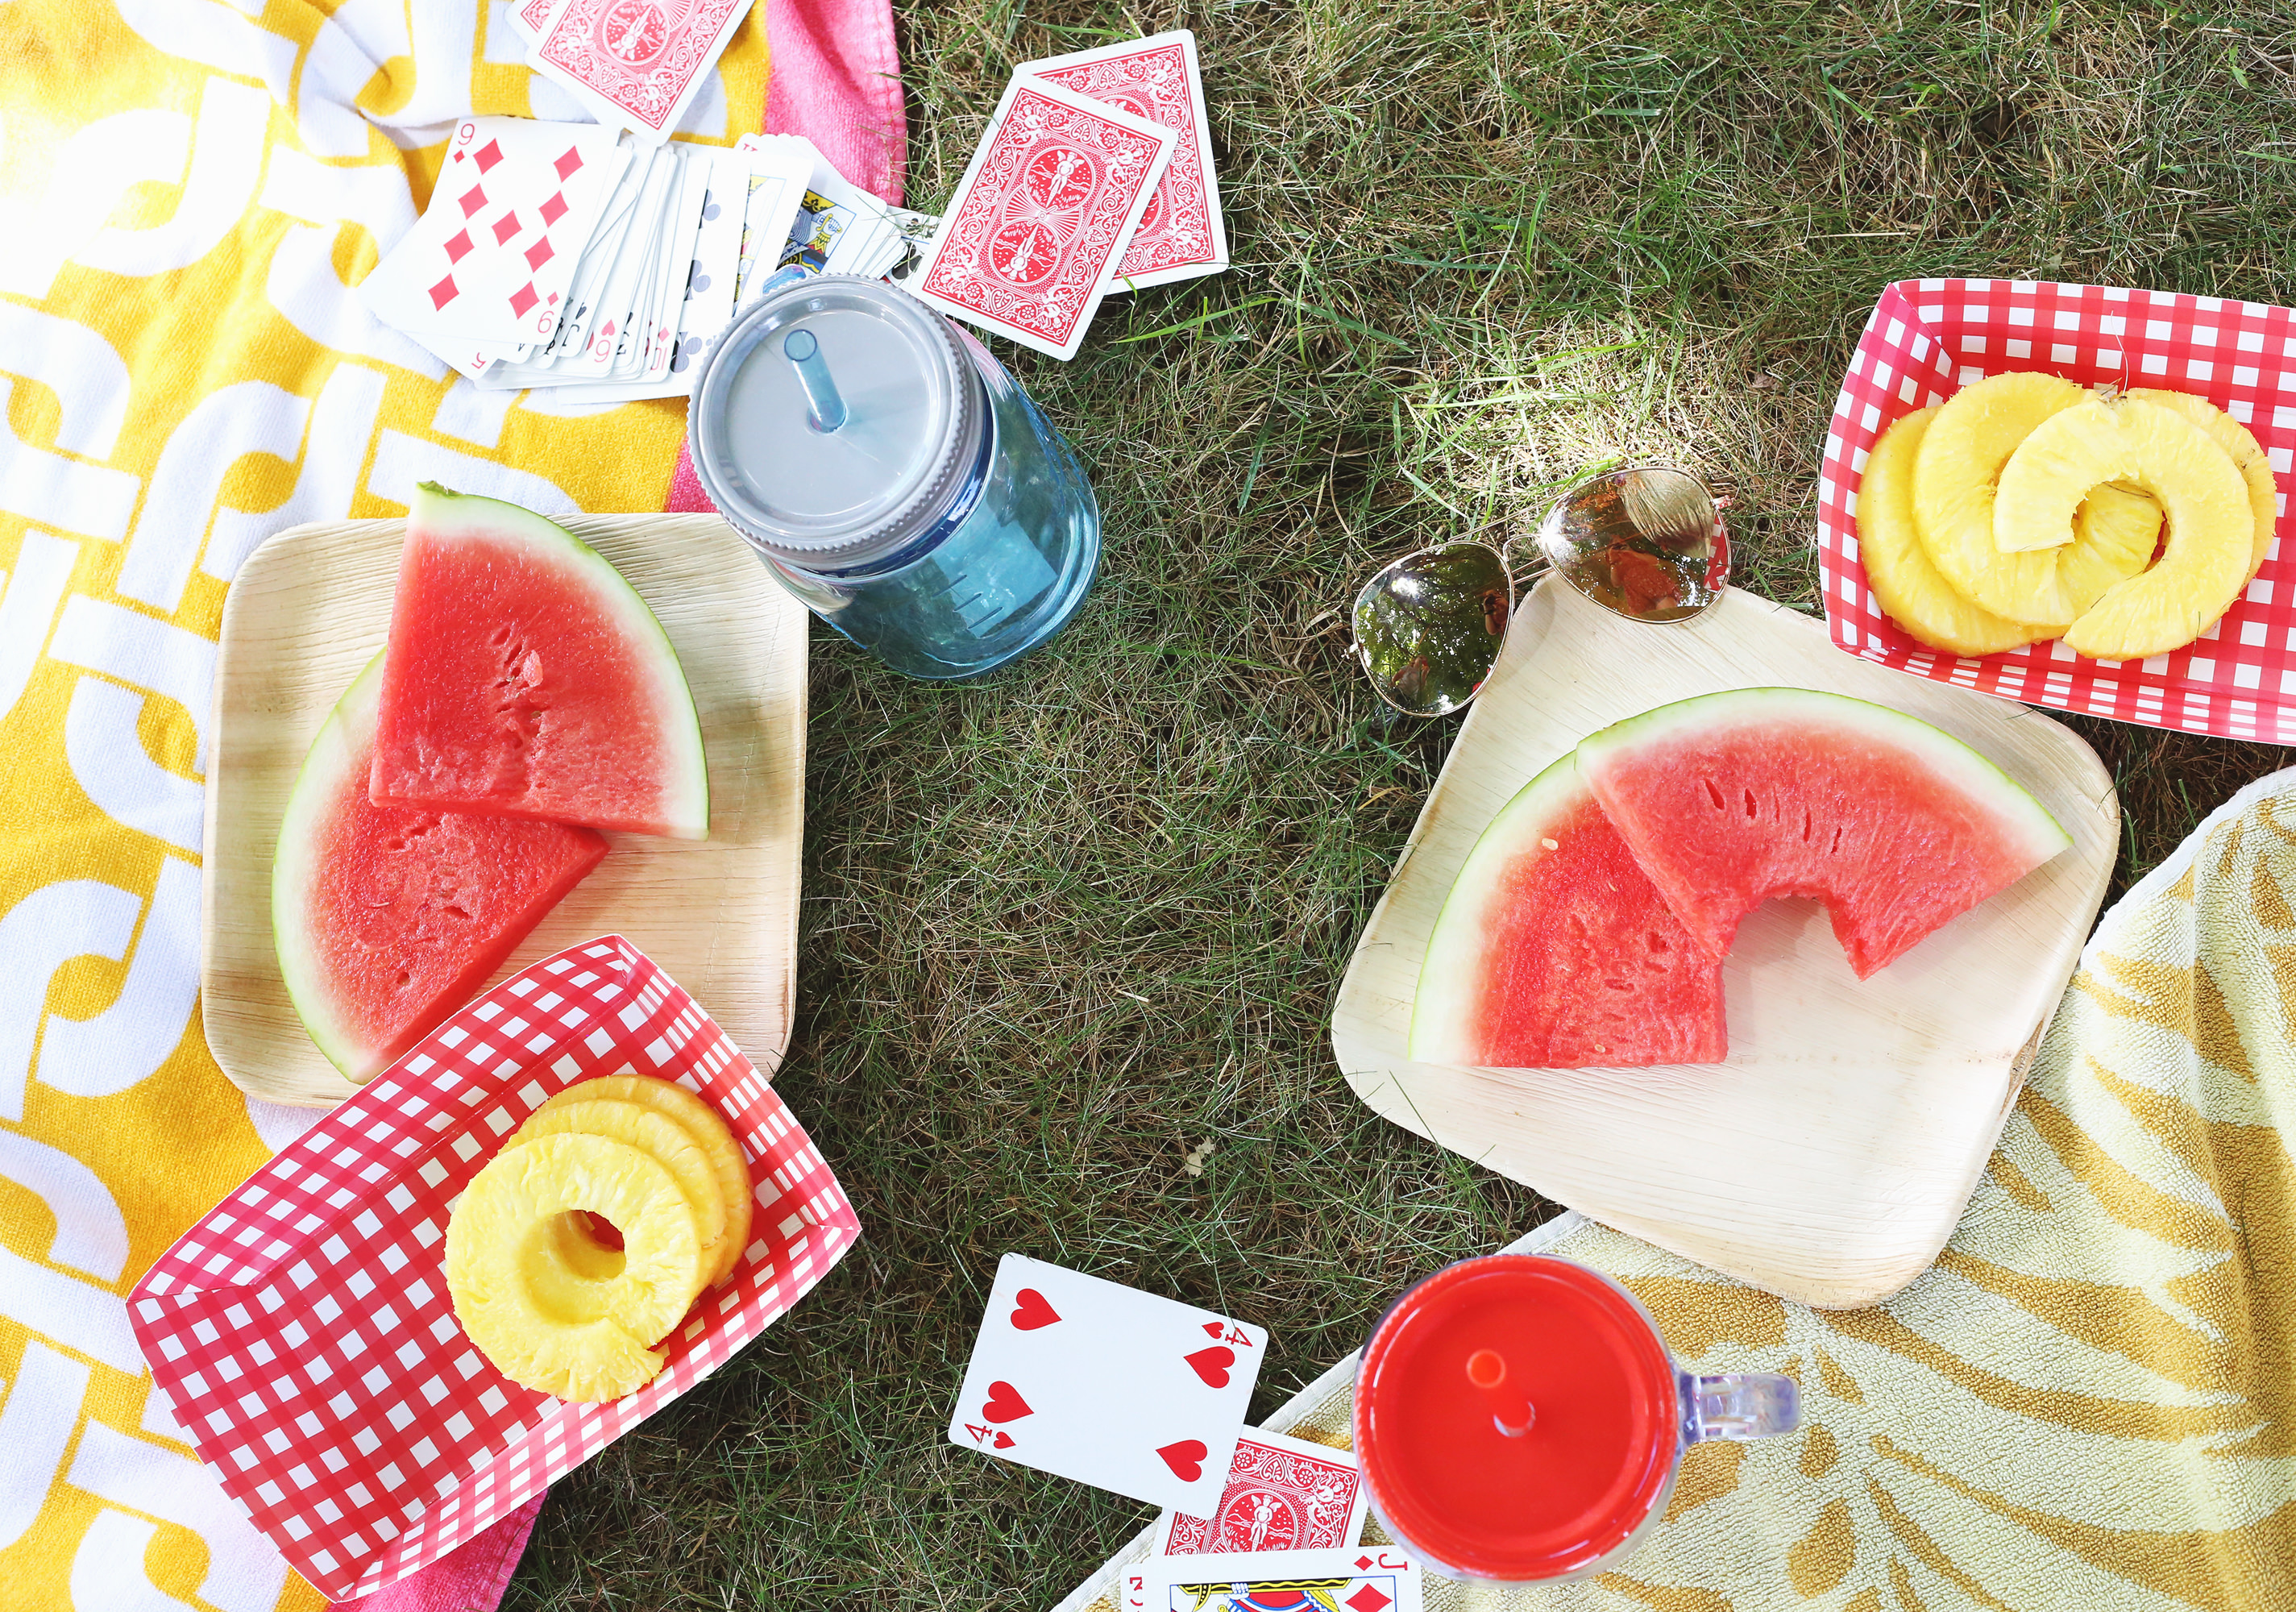 For August's Happy Mail theme, we're taking it outside! Perfect picnic ideas via Lily & Val Living!